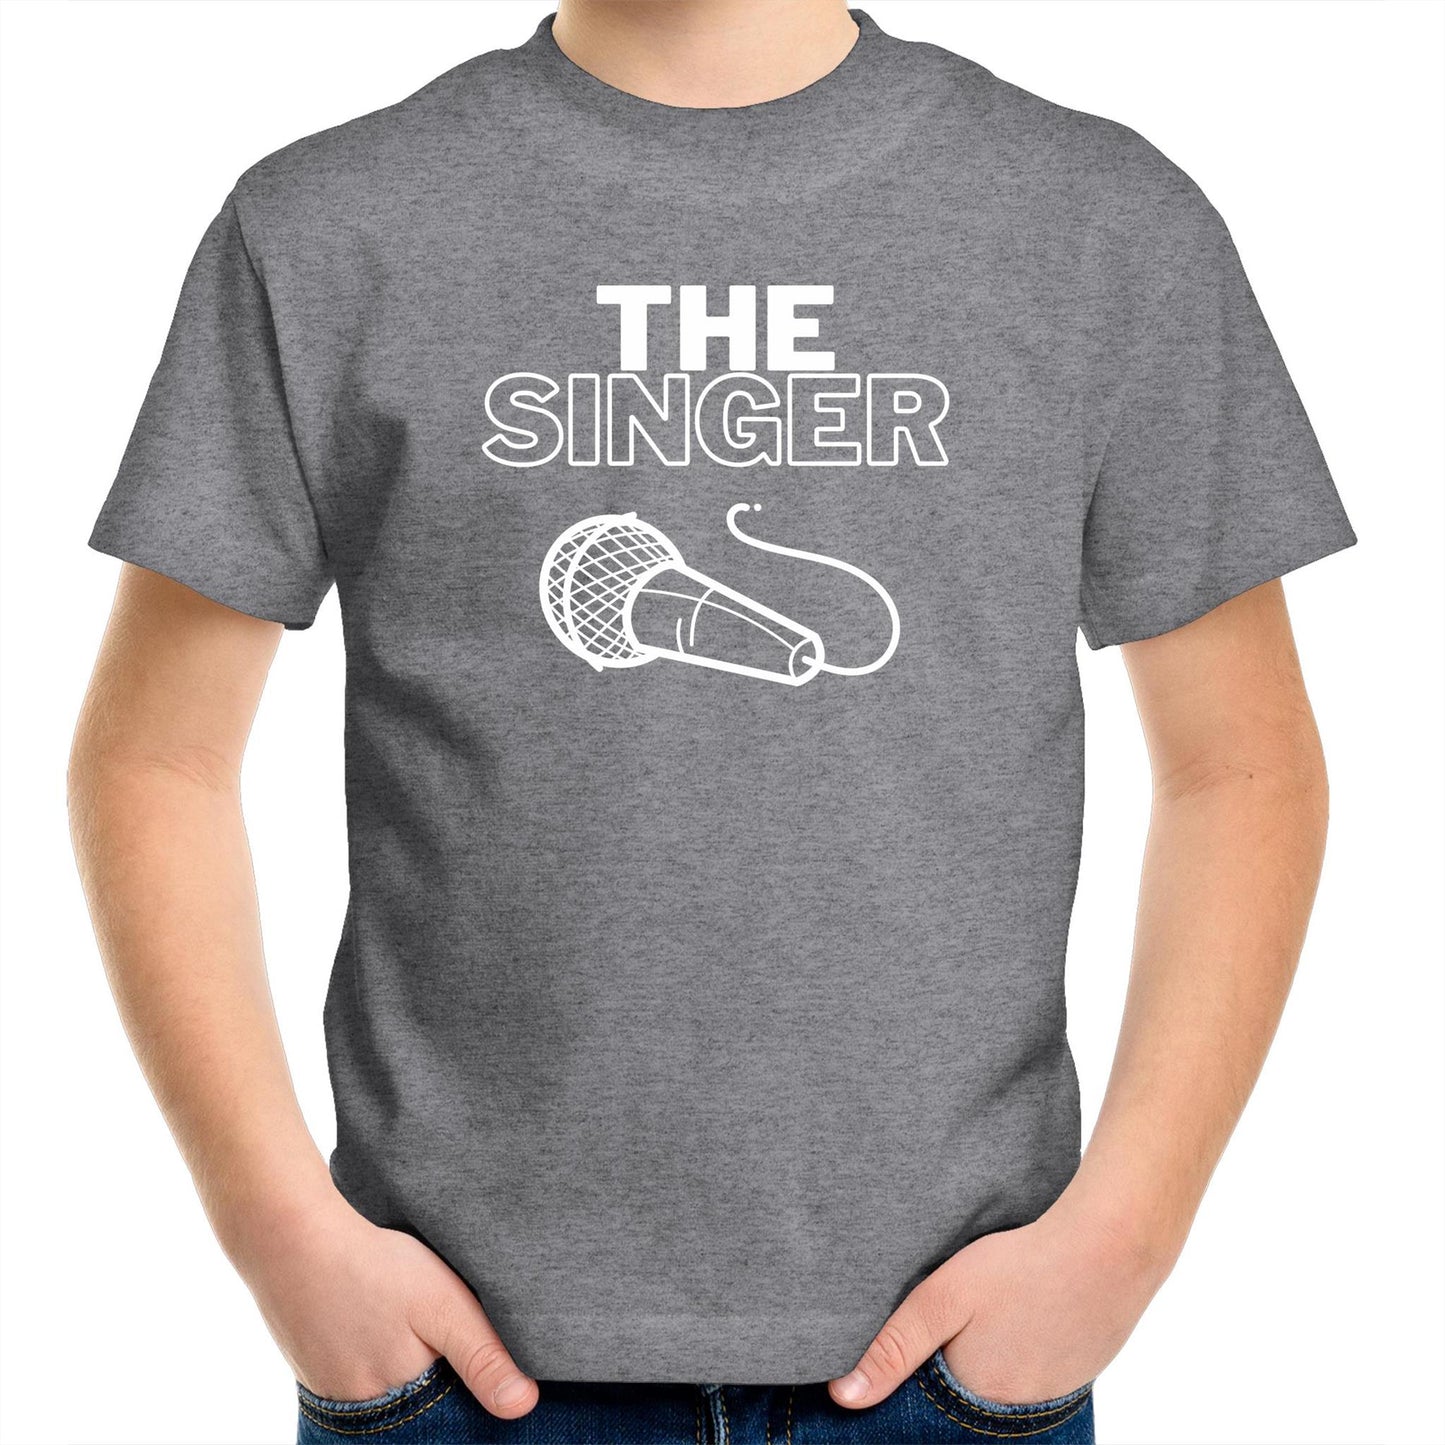 The Singer - Kids Youth T-Shirt Grey Marle Kids Youth T-shirt Music